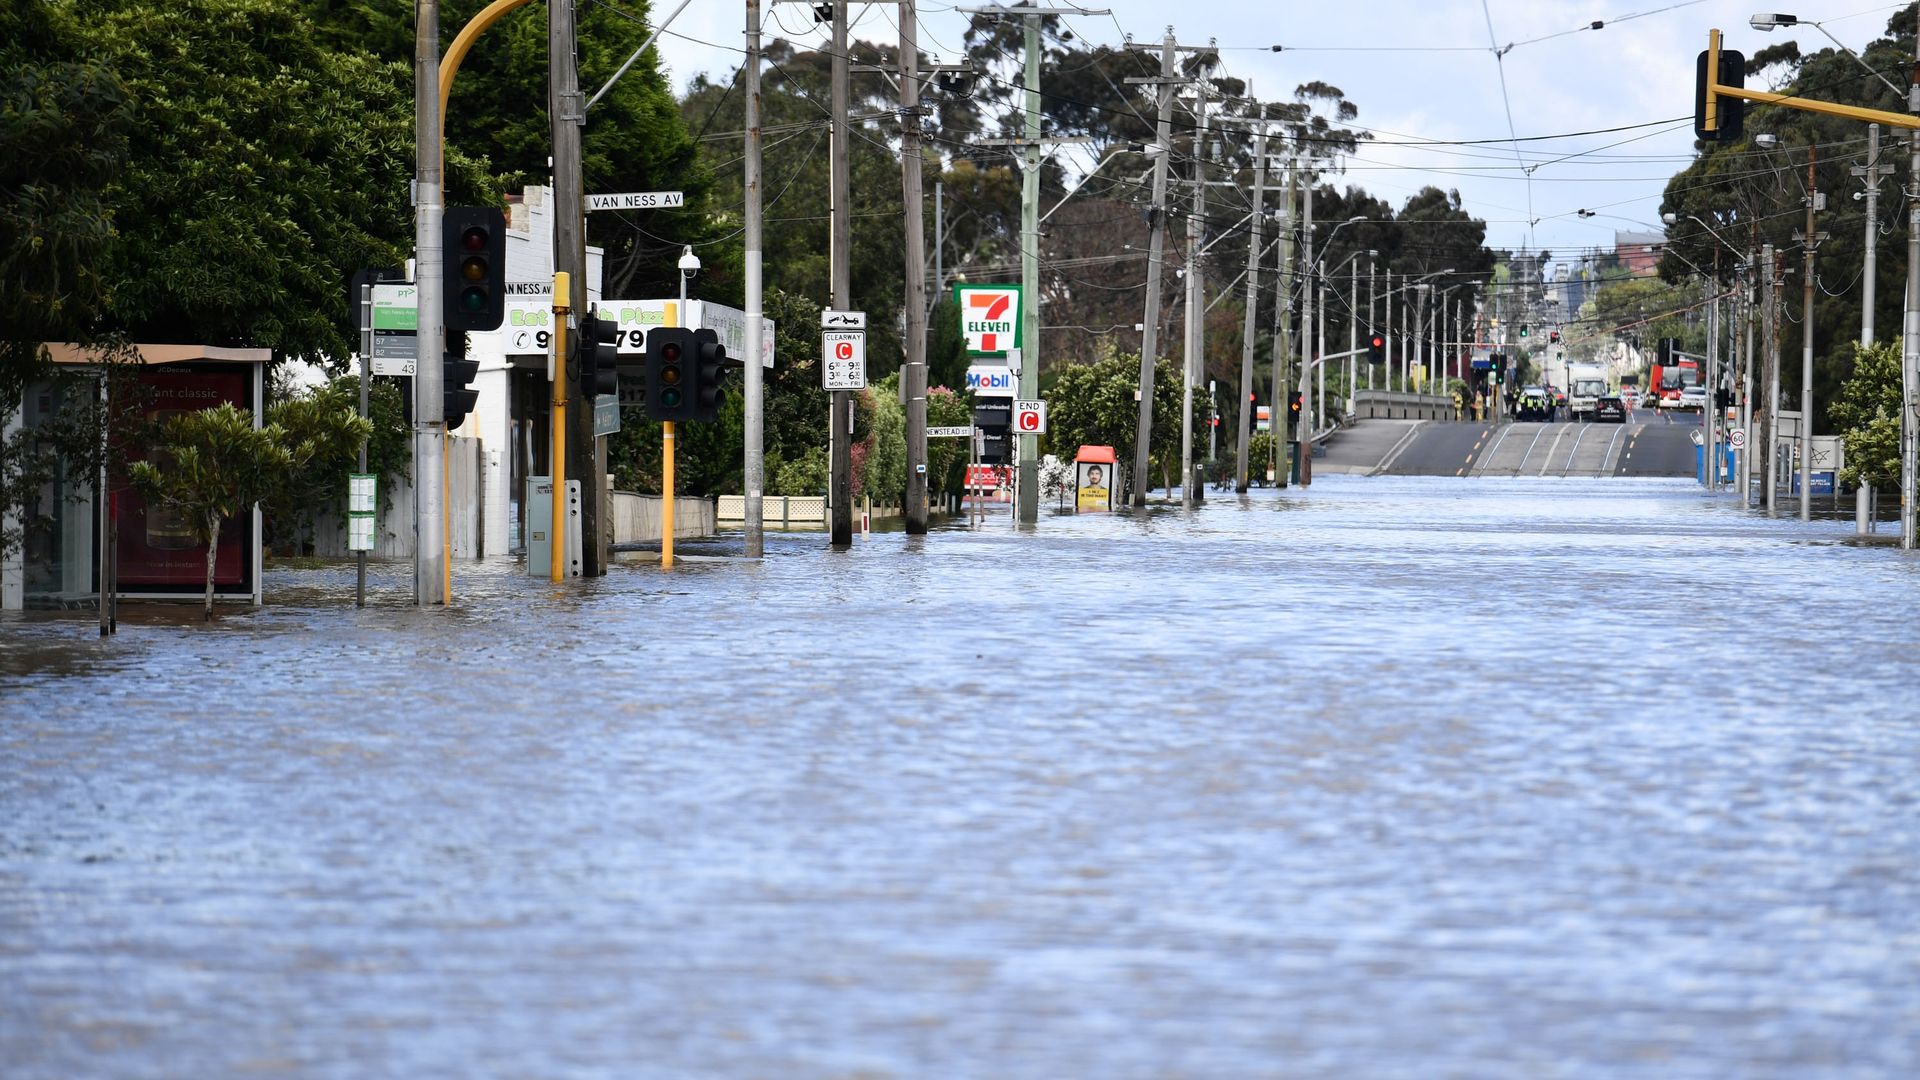 Photo taken on Oct. 14, 2022 shows a flooded area in Victoria, Australia.